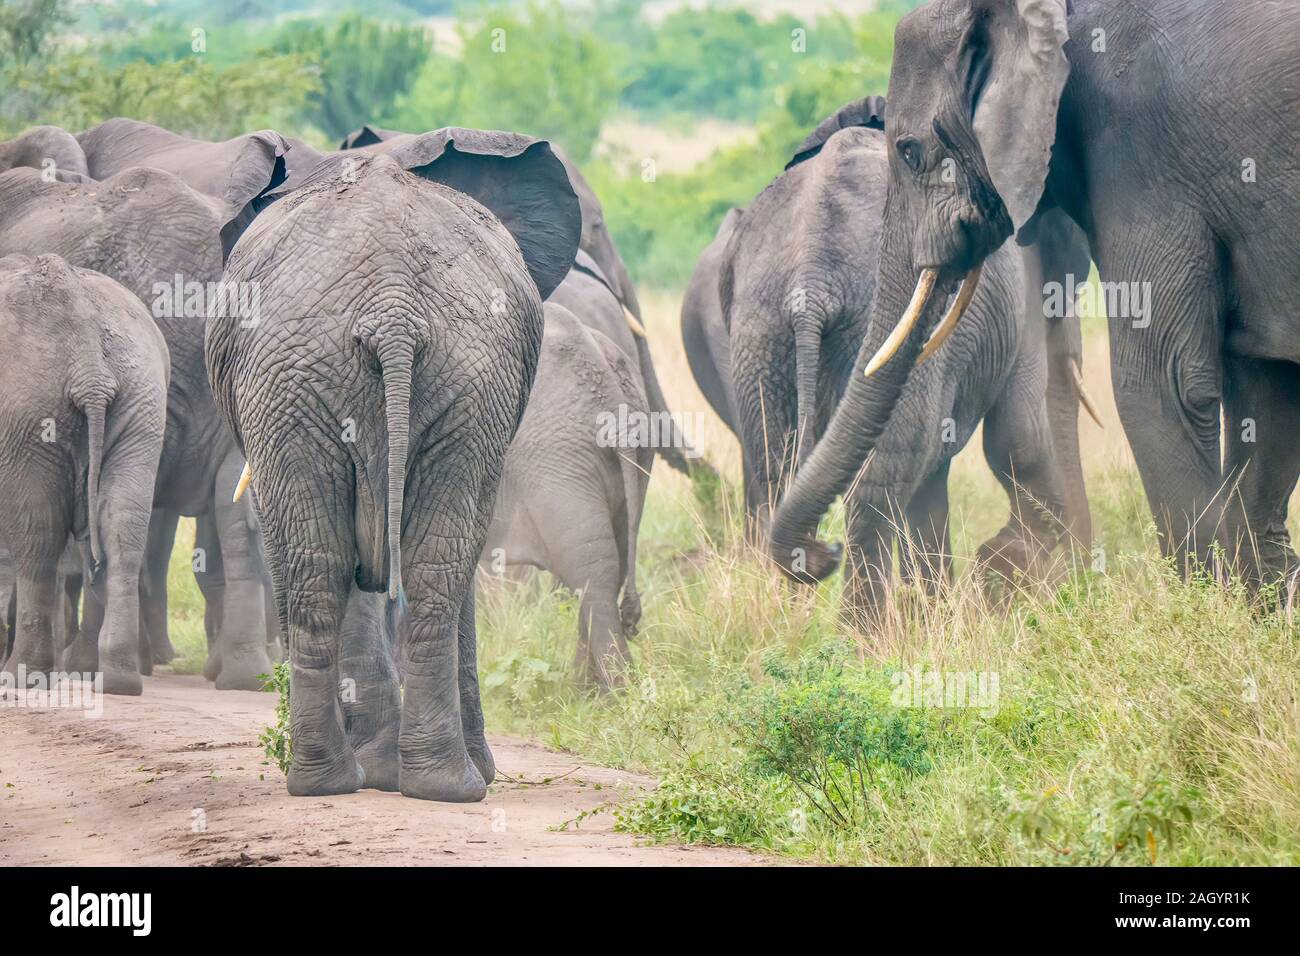 Focus on the rear elephant in a herd of African elephants walking along a dusty dirt road in a national park in Uganda. Motion blur on the moving herd. Stock Photo